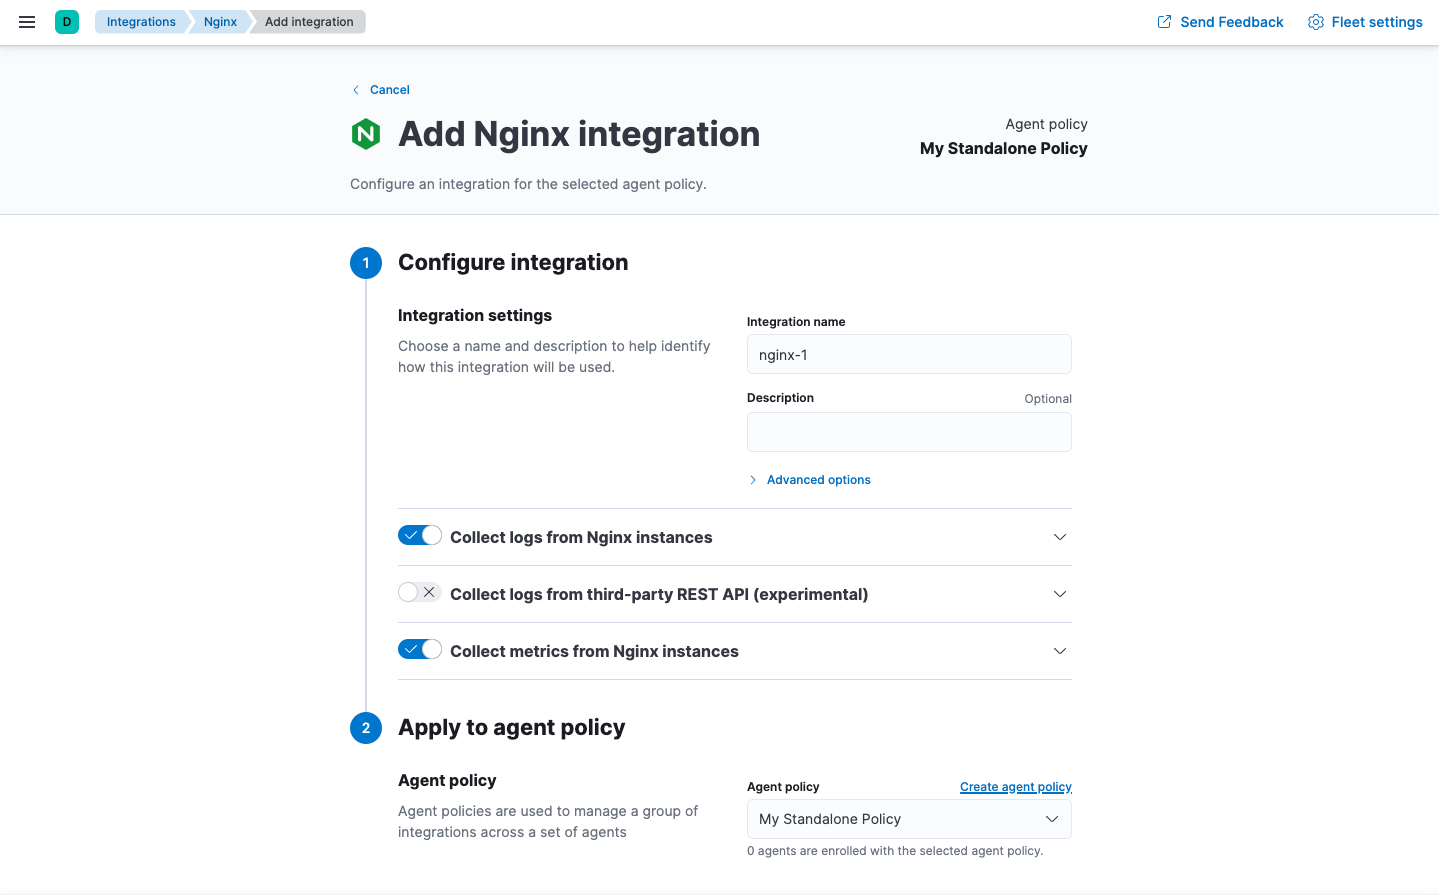 Add Nginx integration screen with agent policy selected